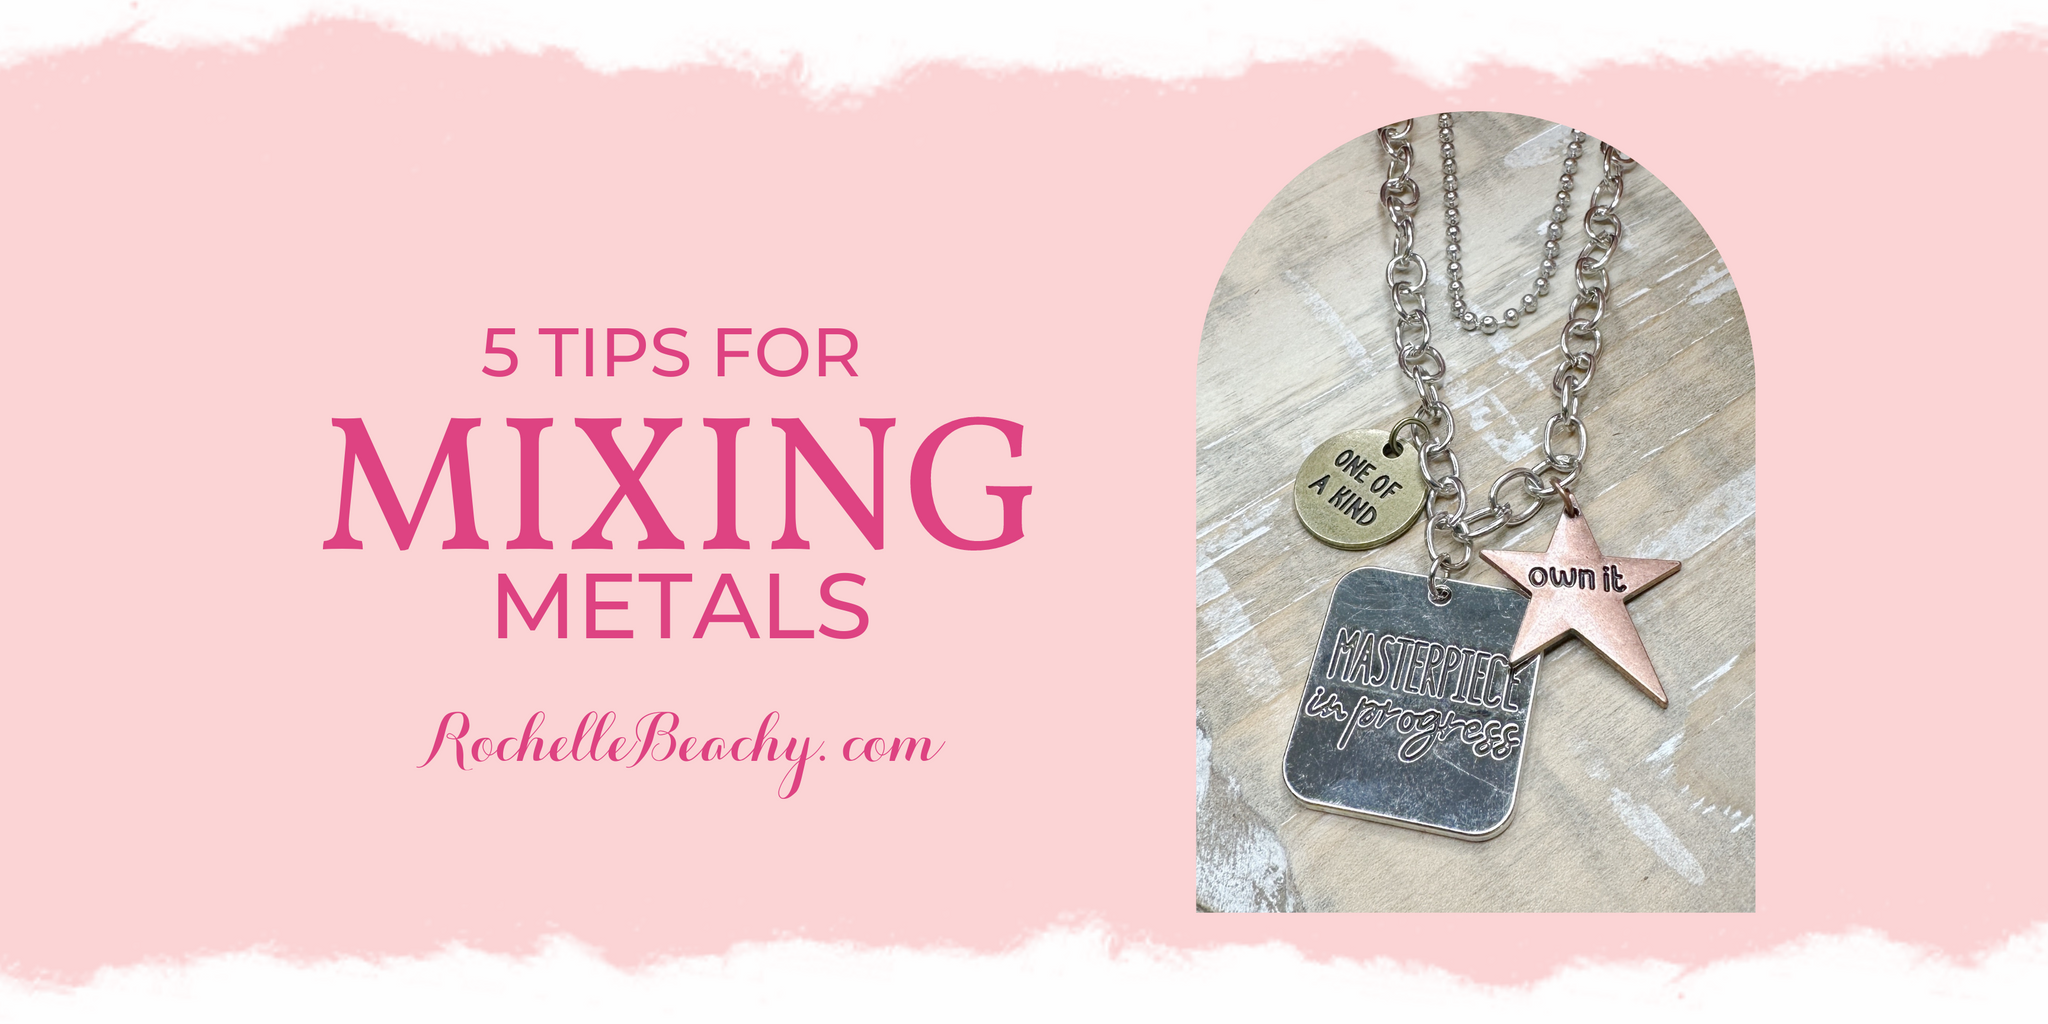 5 Tips for Mixing Metals